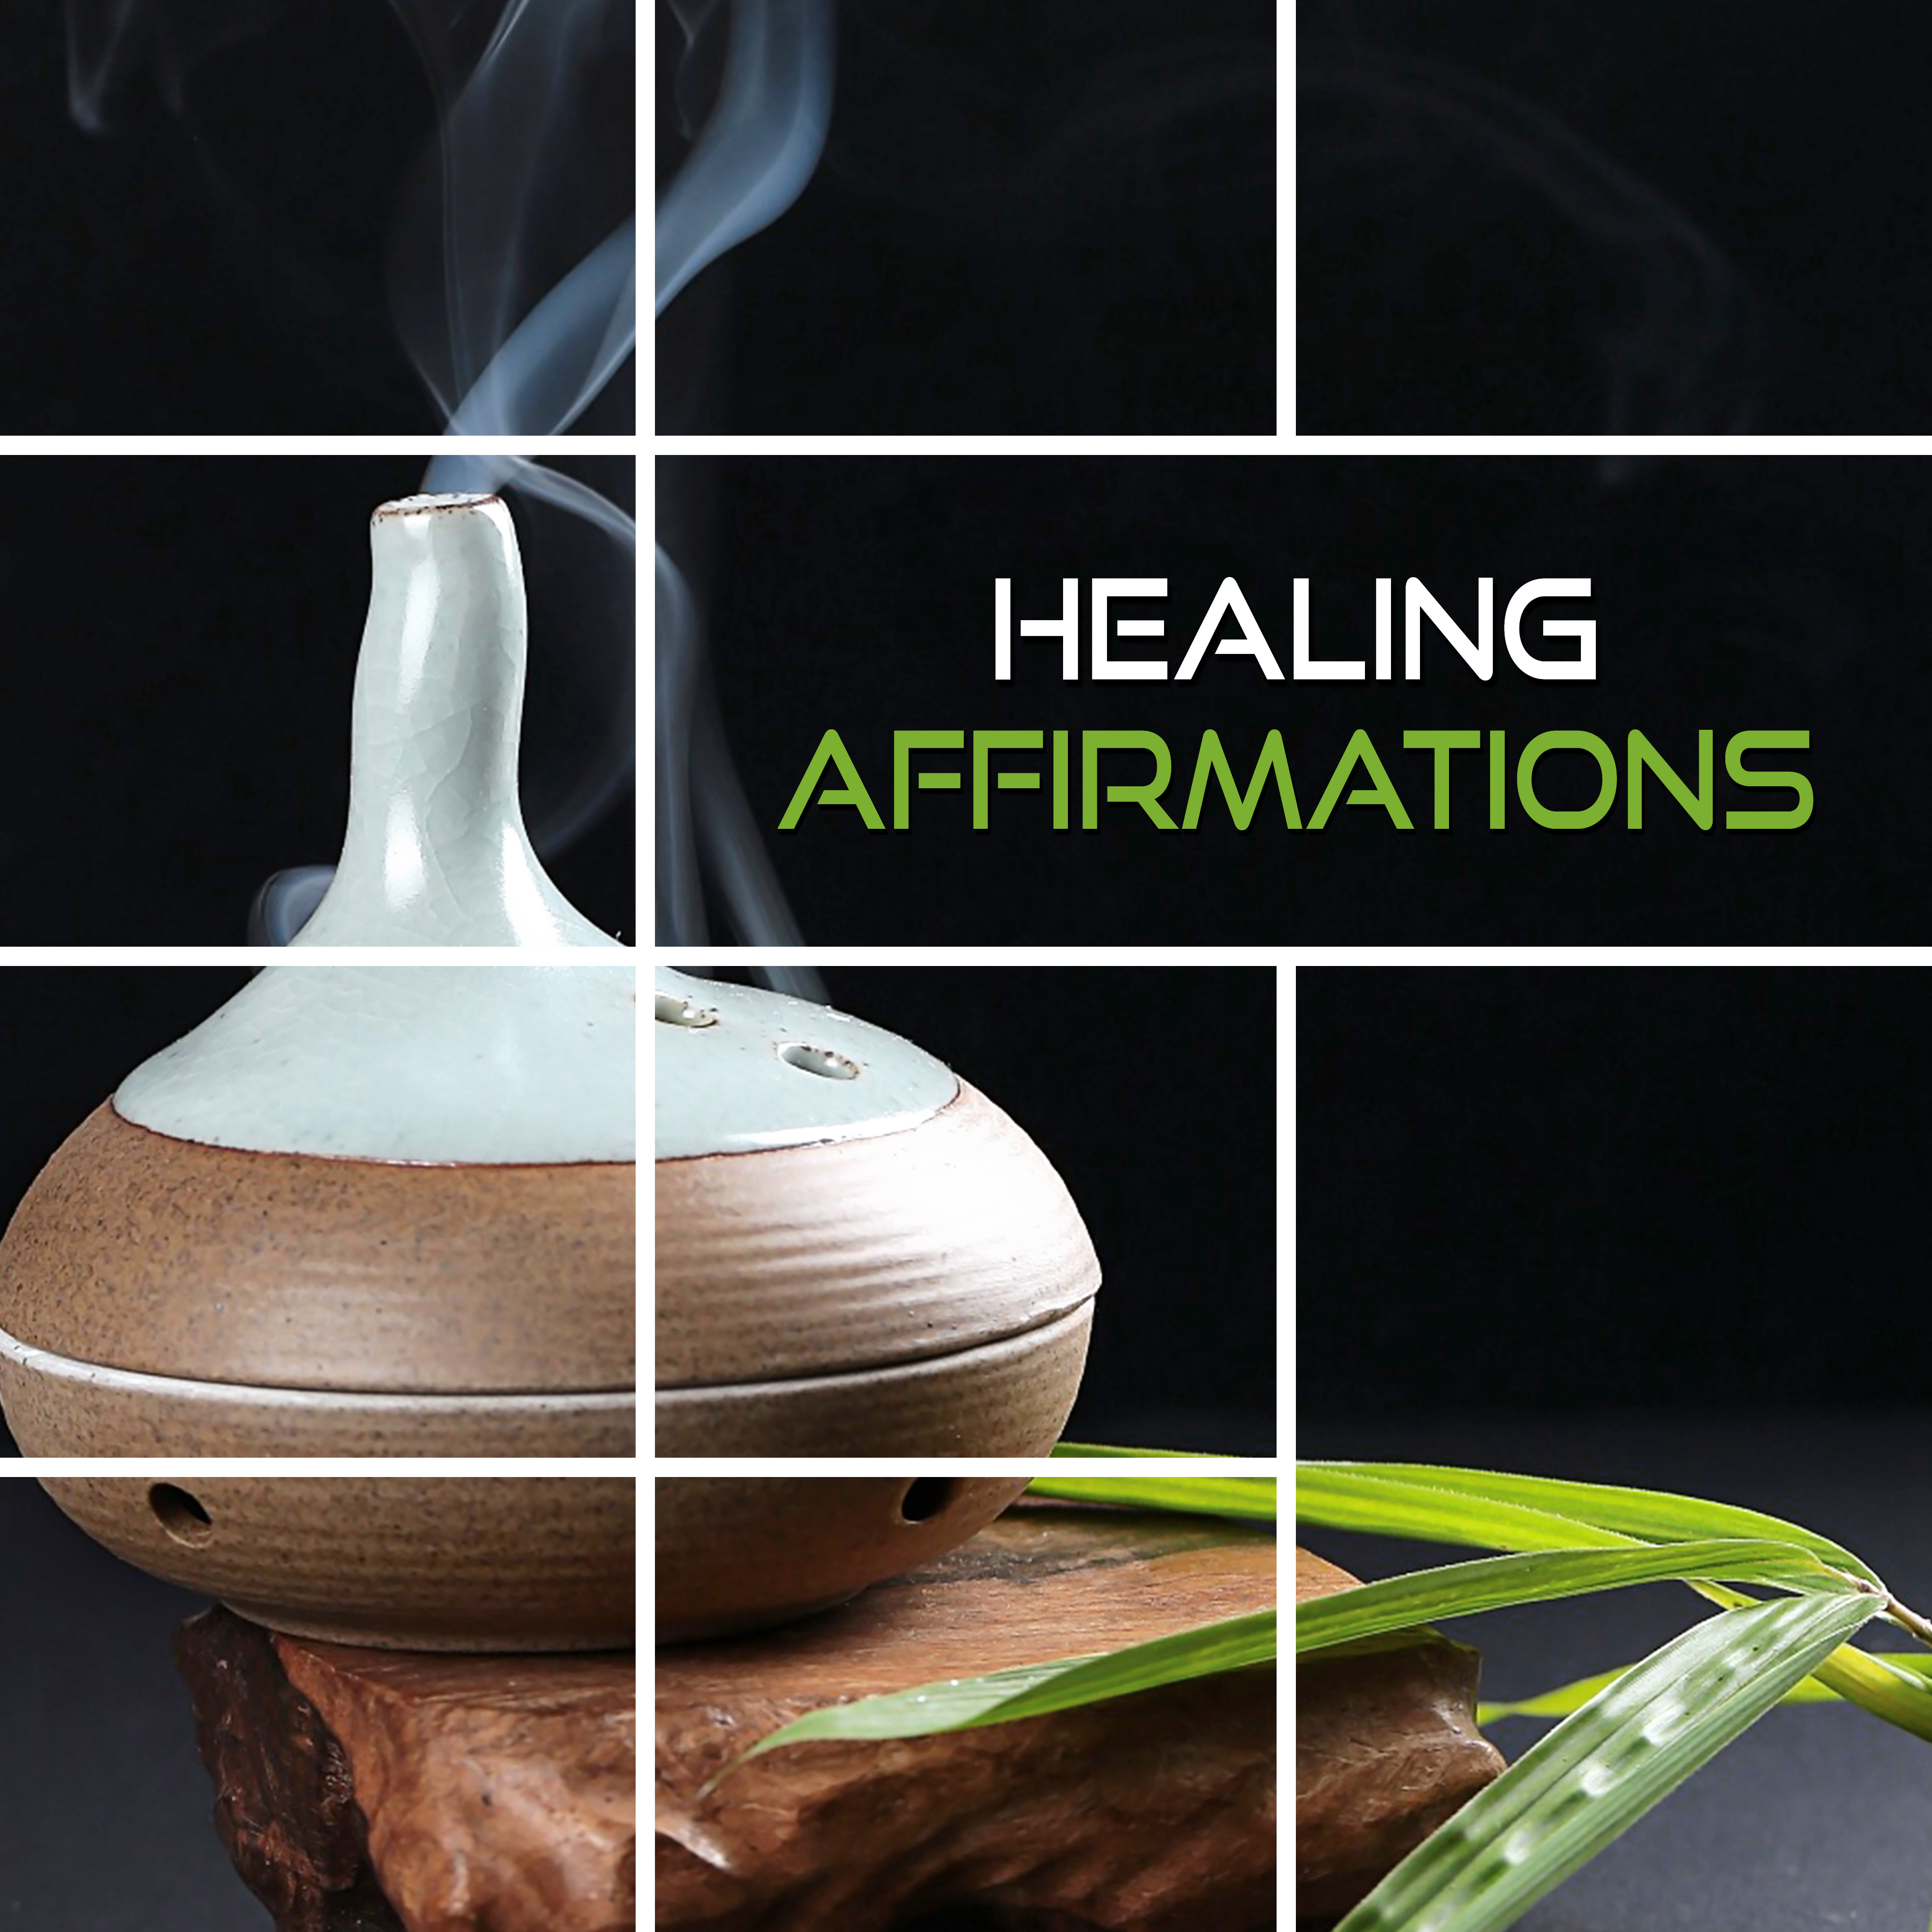 Healing Affirmations – Mindfulness Meditation, Zen Music, Reiki Healing, Mantras, Harmony & Serenity, Calming Sounds for Peace of Mind, Yoga Music